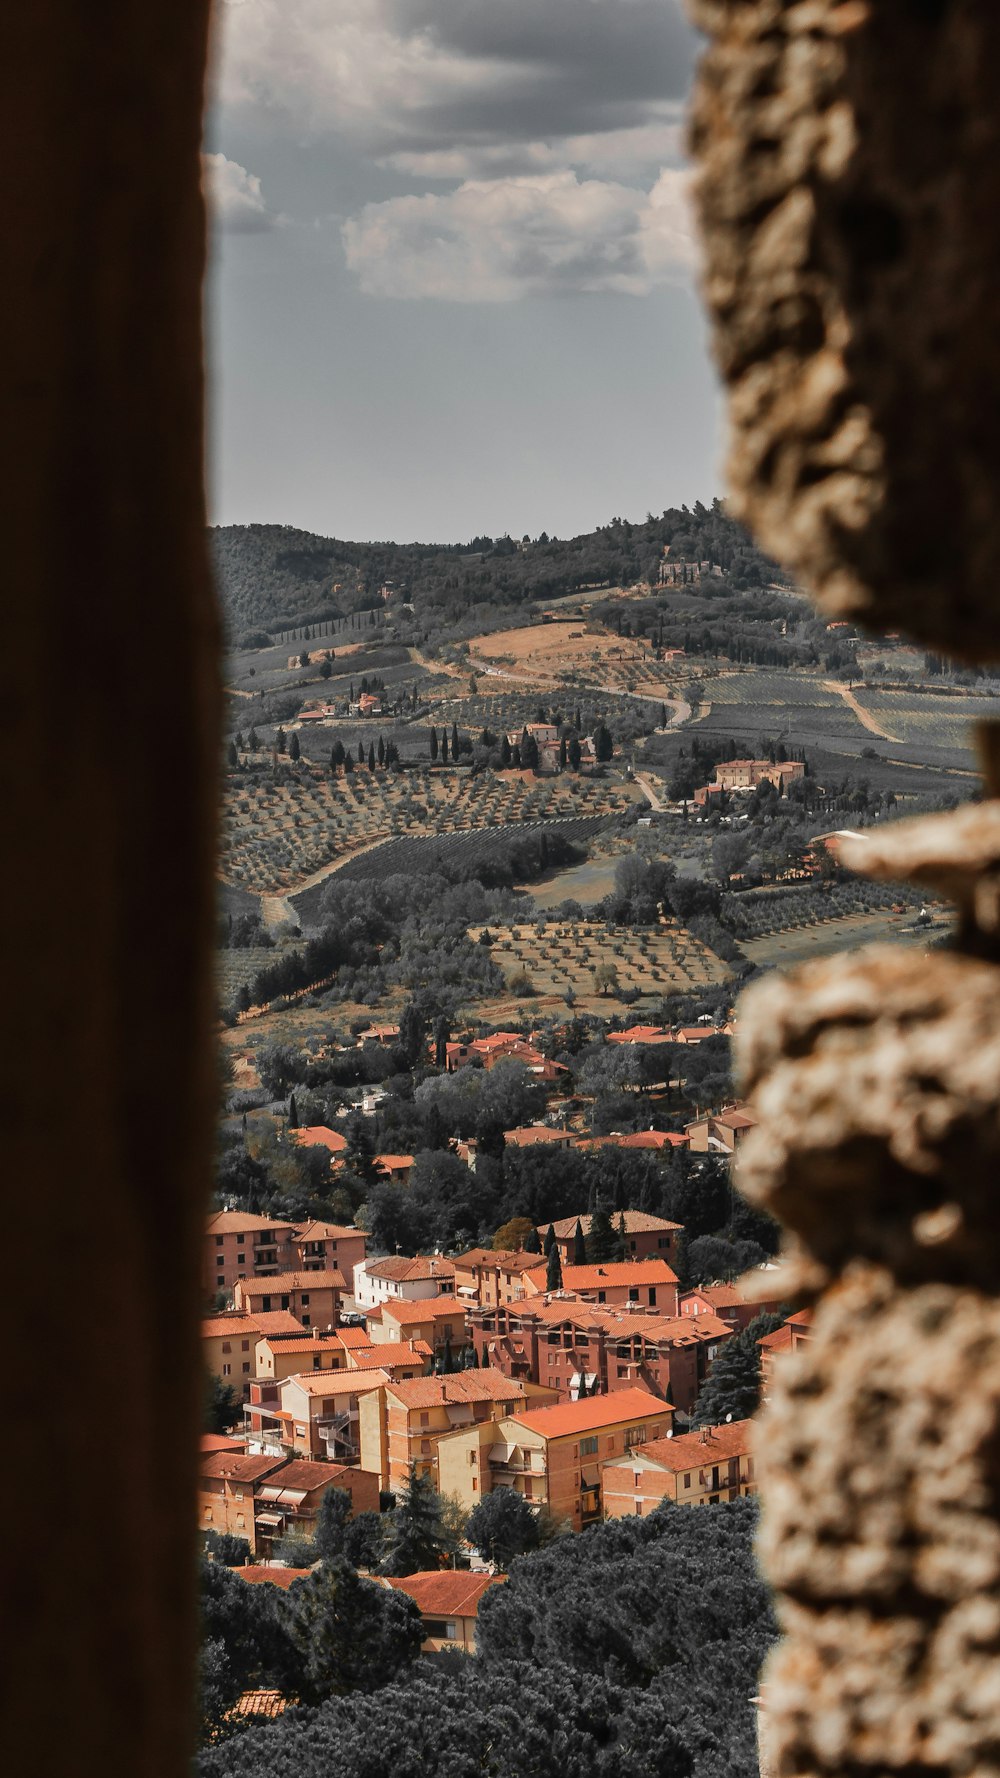 a view of a town from a window in a stone wall